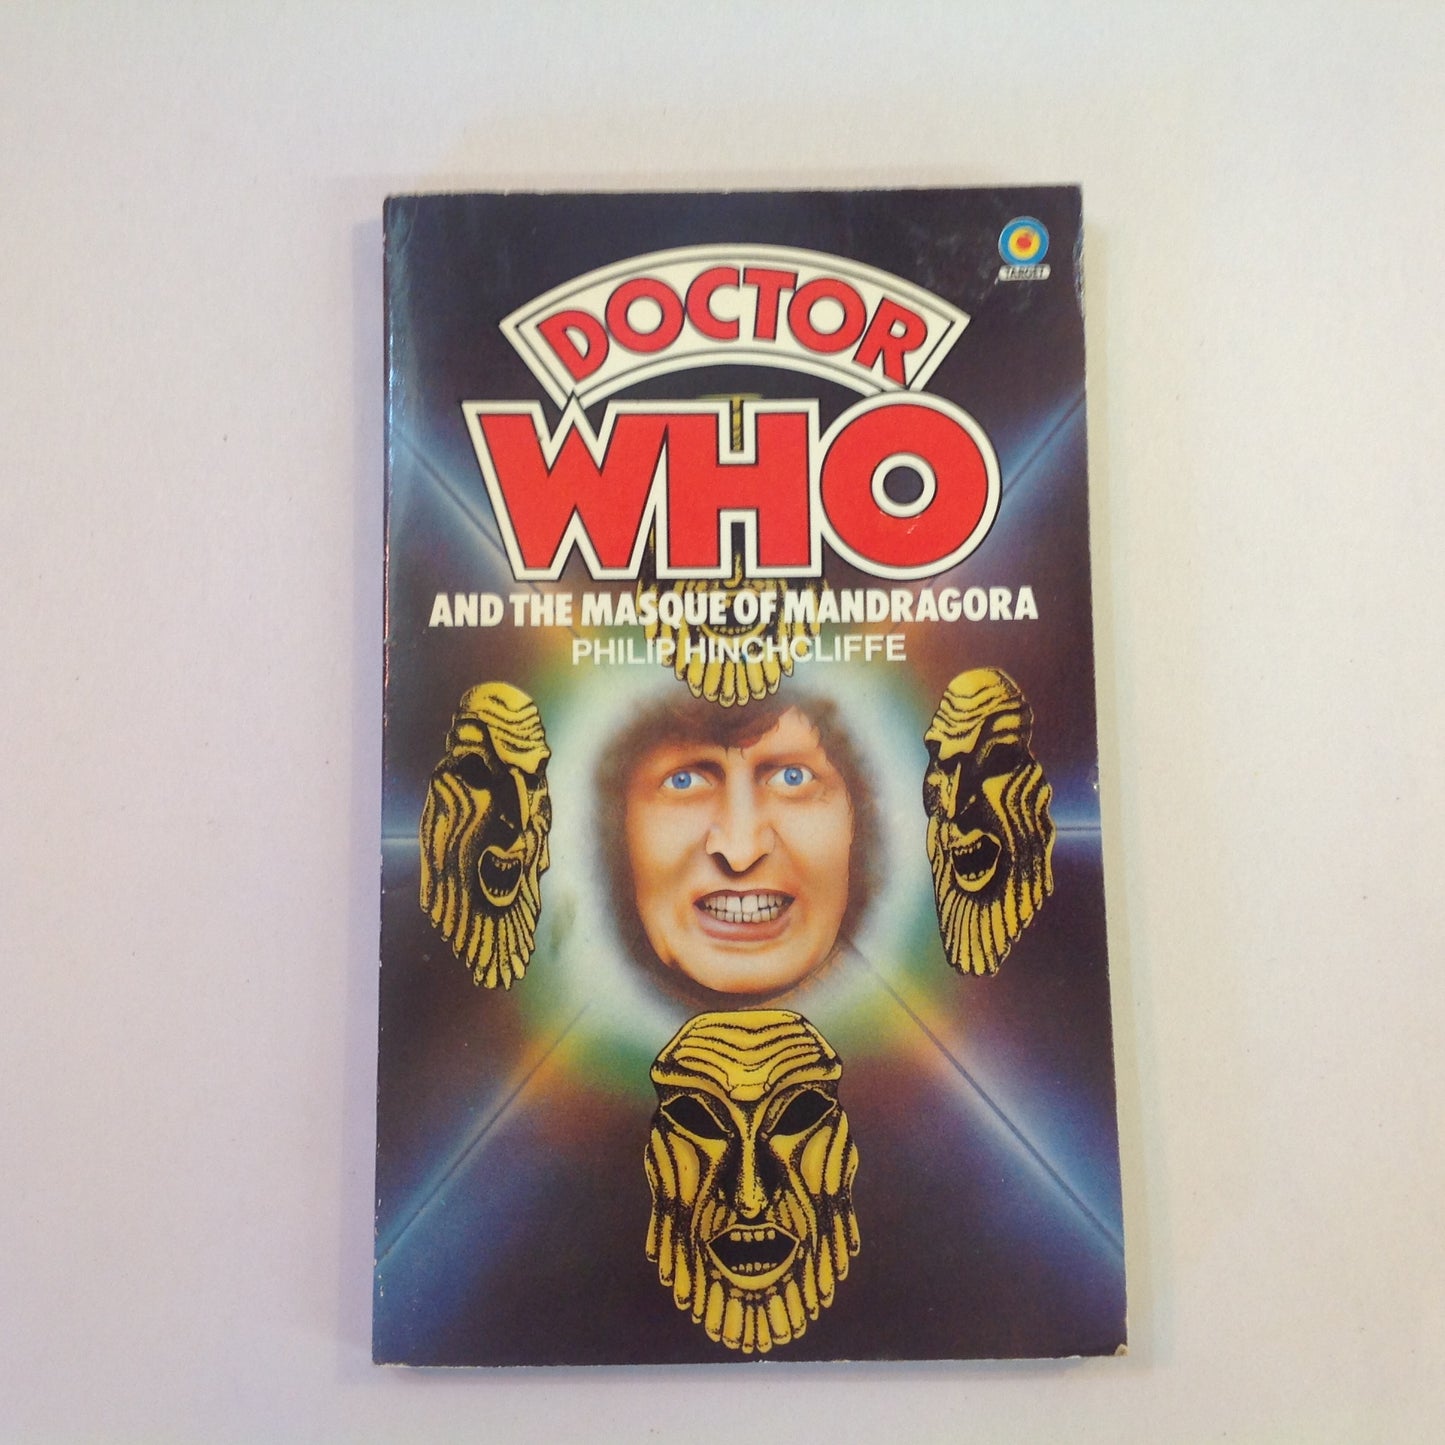 Vintage 1980 Mass Market Paperback Doctor Who and the Masque of Mandragora Philip Hinchcliffe